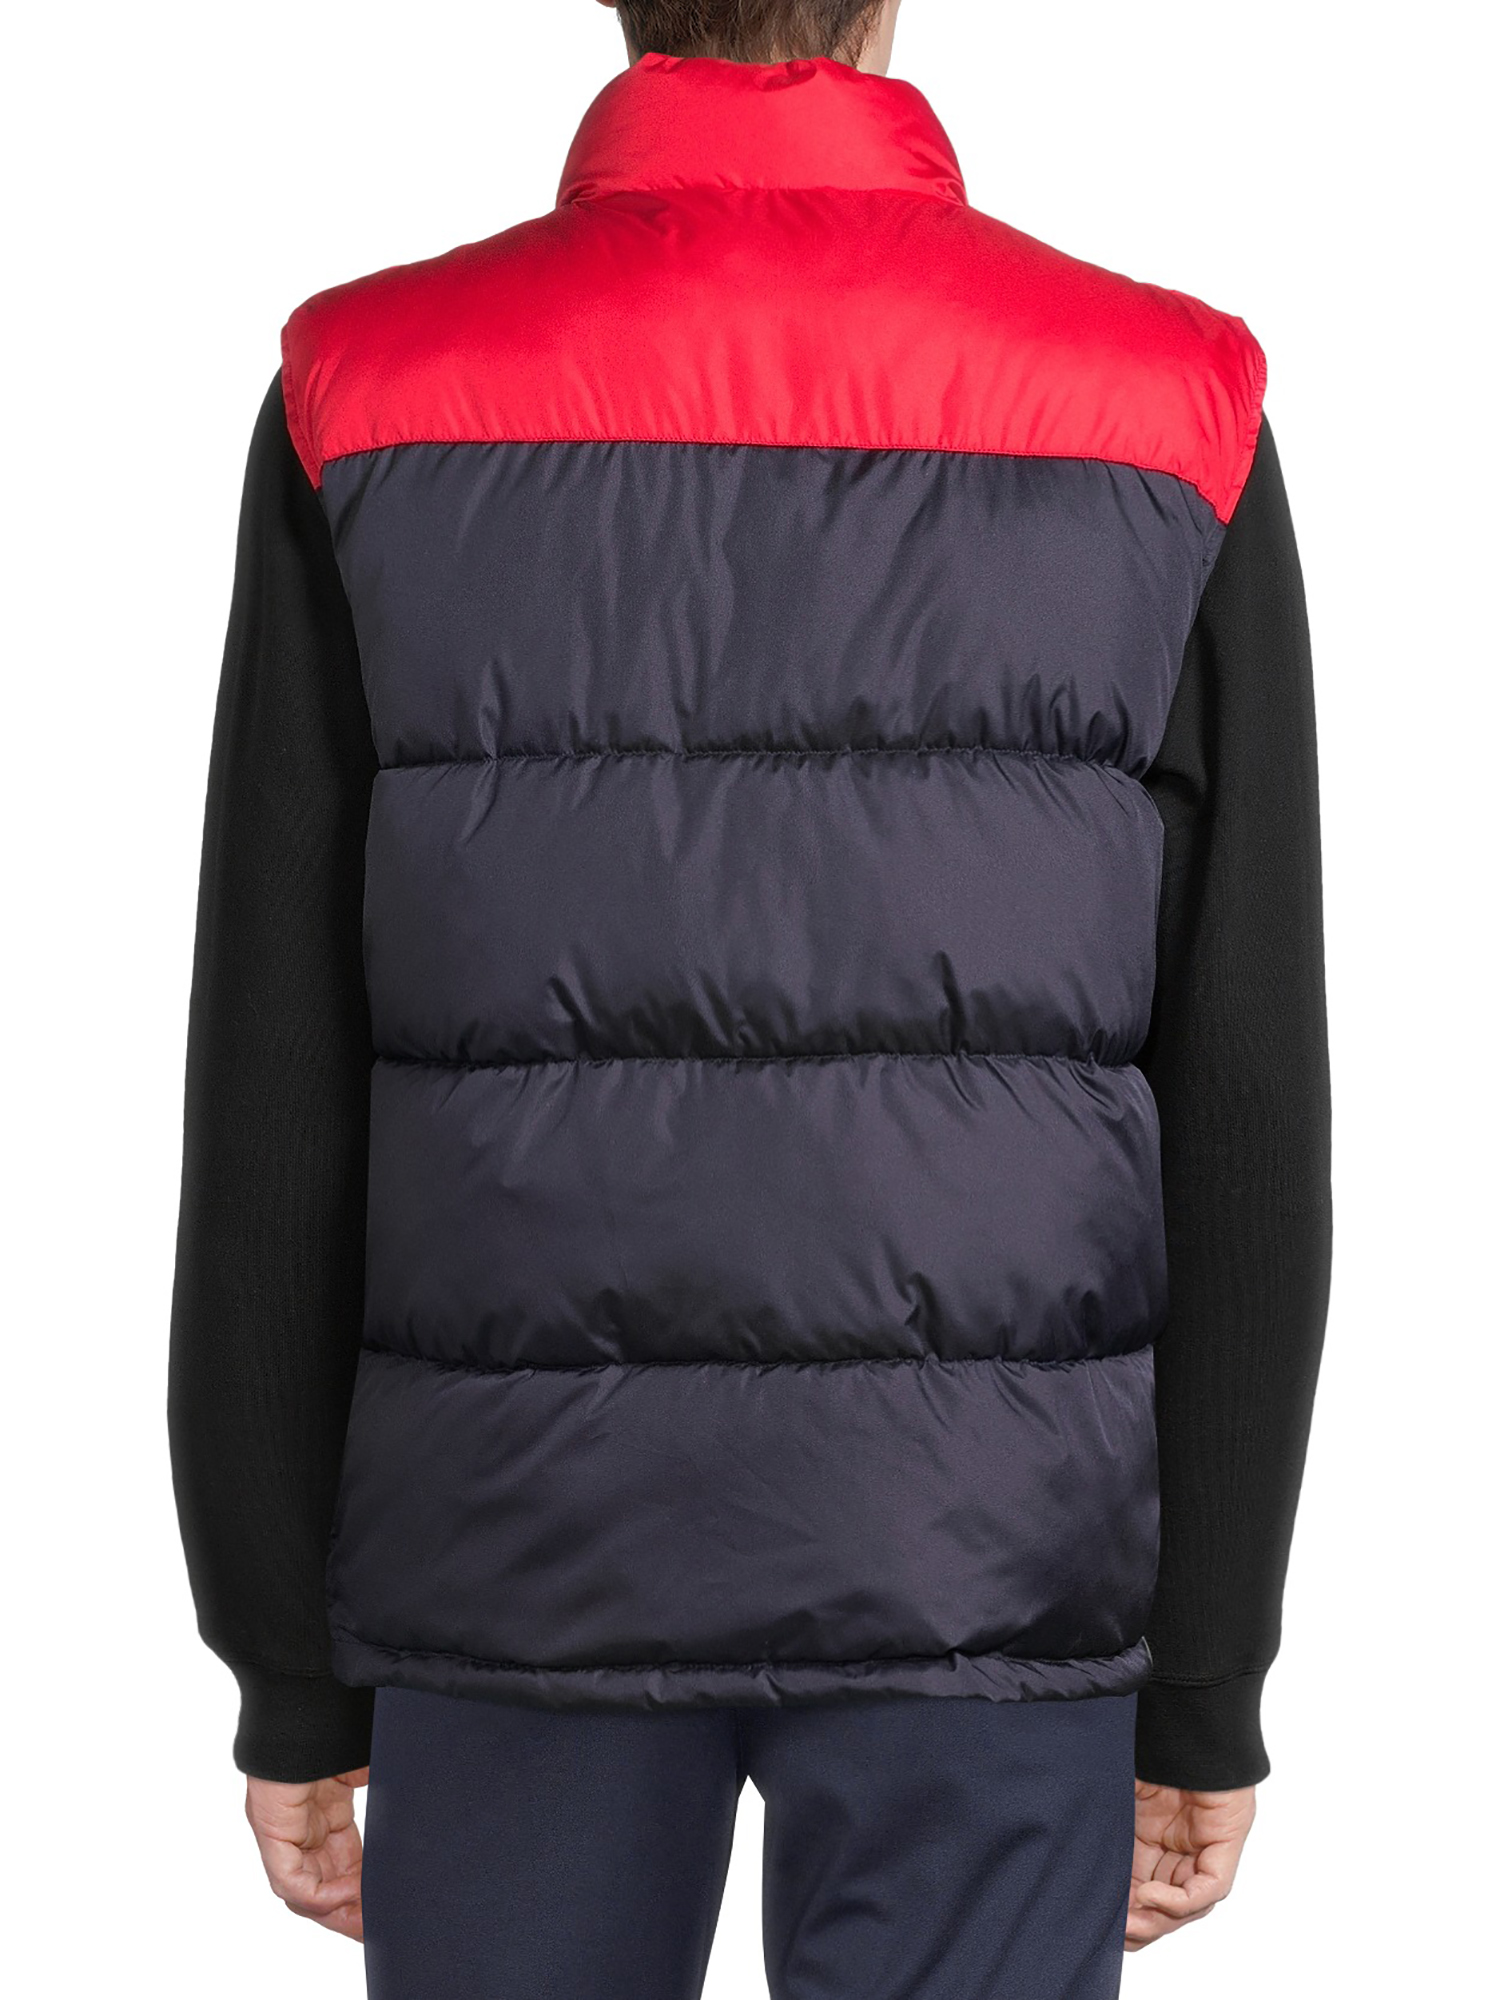 U.S. Polo Assn. Puffer Vest - image 3 of 6